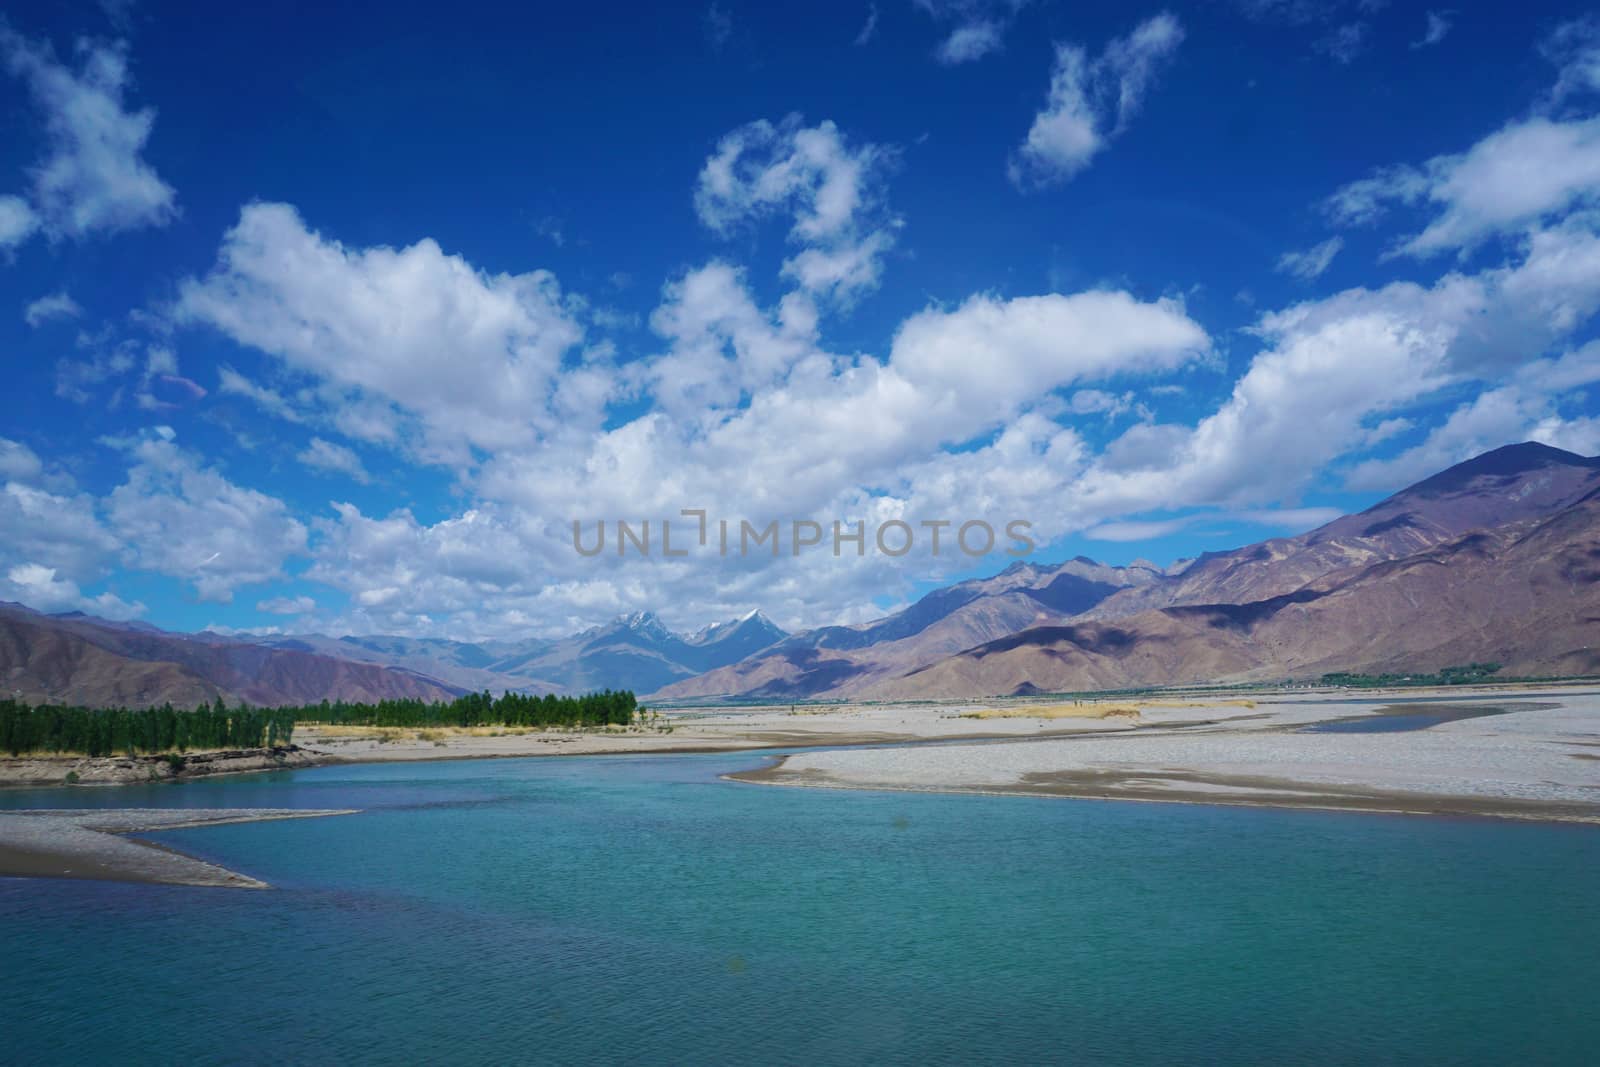  The Yamdrok Yumtso lake,Tibet, Yamdroog is the fifth largest lake in the Tibet Autonomous Region and the largest inland brackish lake in southern Tibet.  